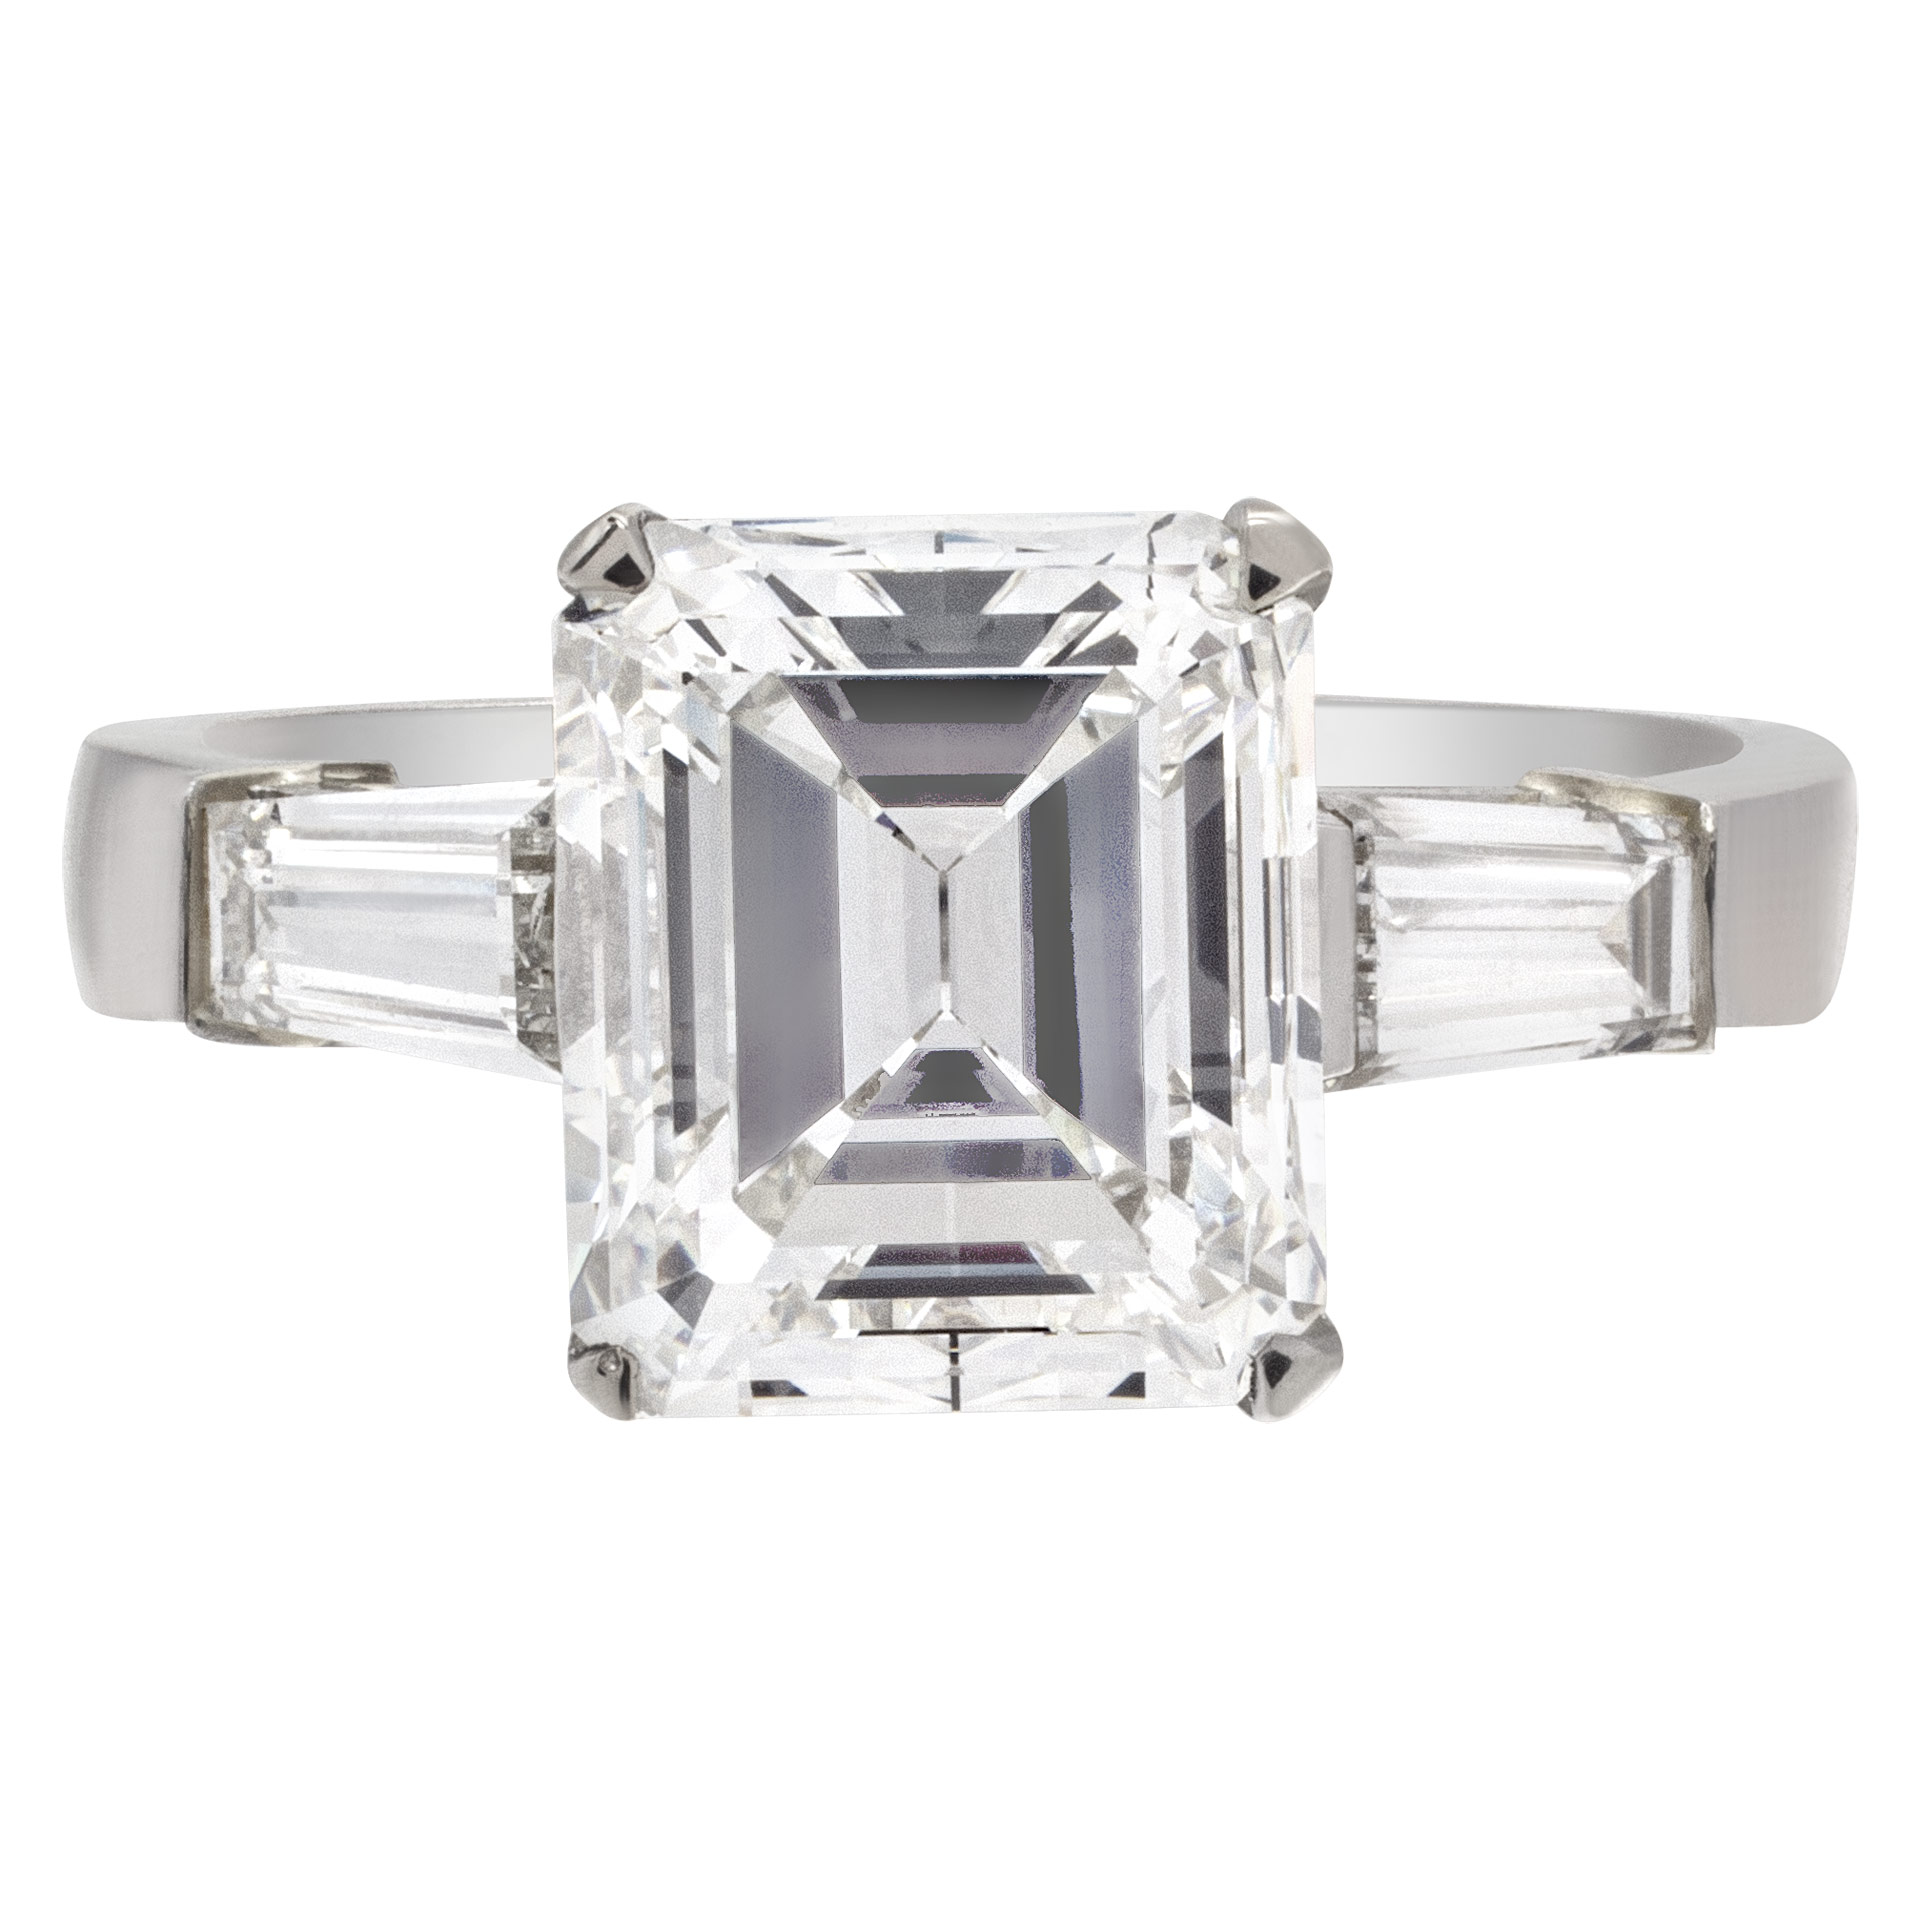 GIA certified emerald cut 3.95 carat (F color, VVS2 clarity) ring set in platinum setting image 1